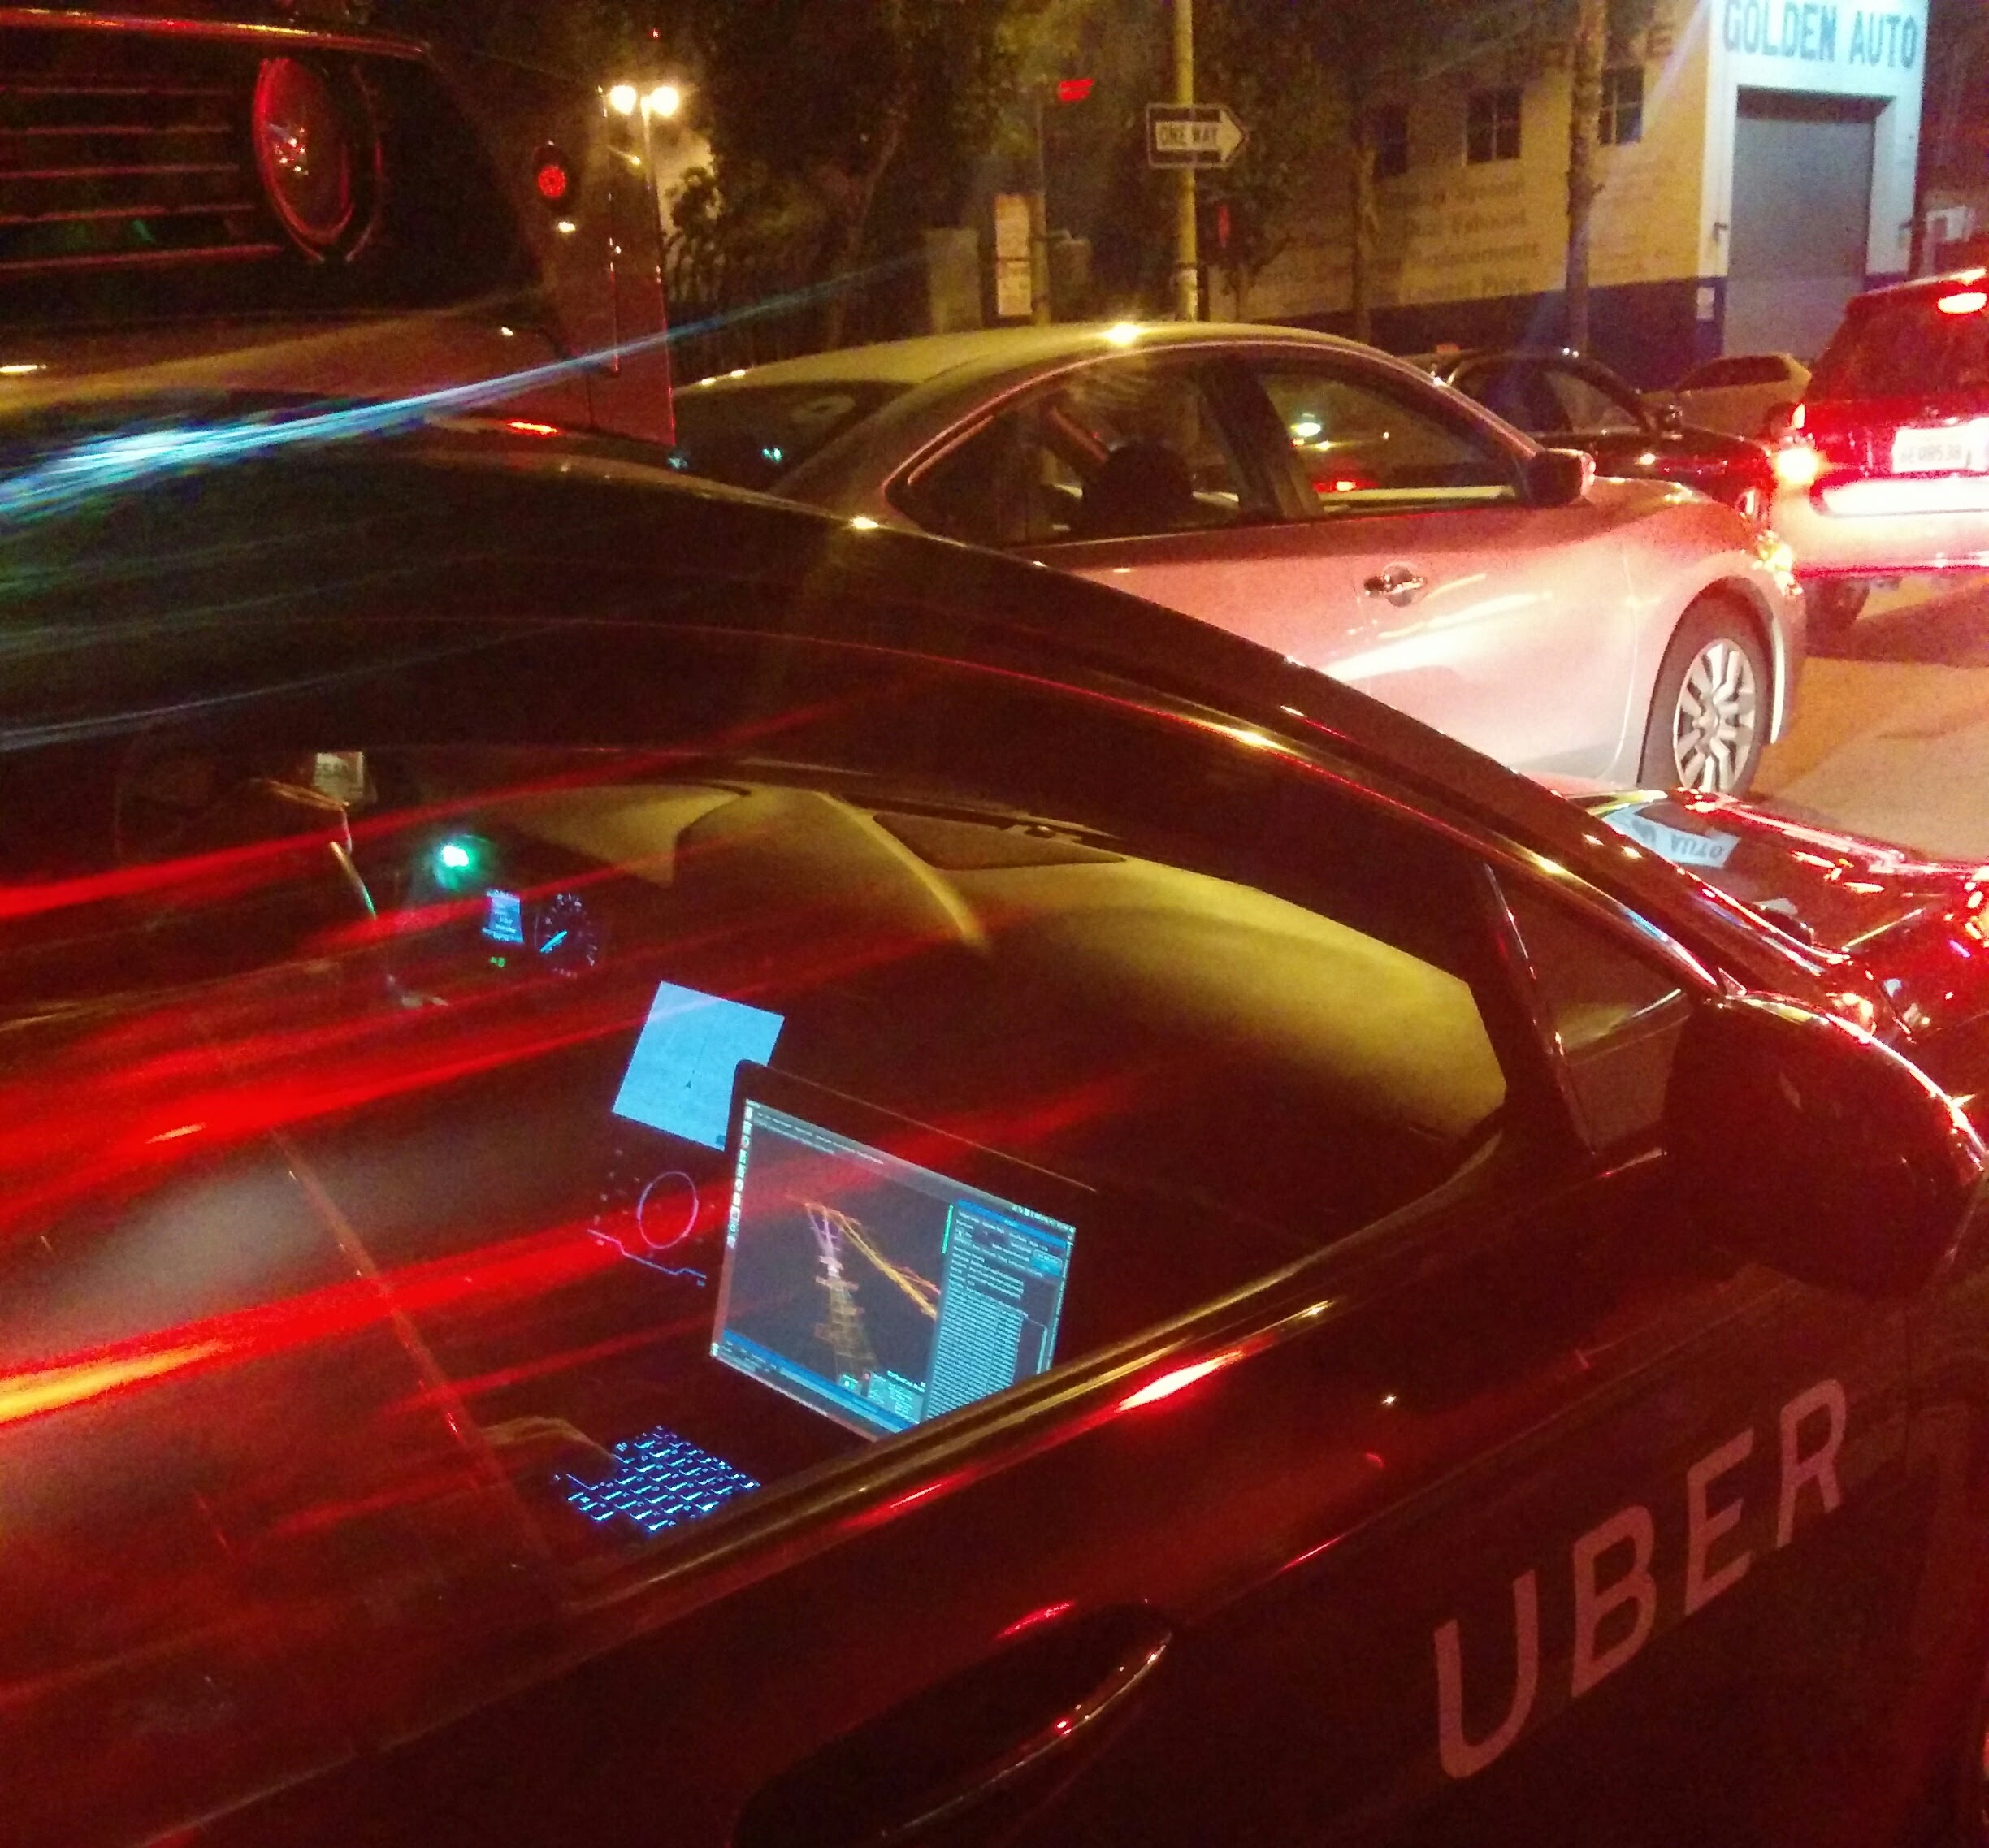 Uber mapping vehicle spotted in San Francisco